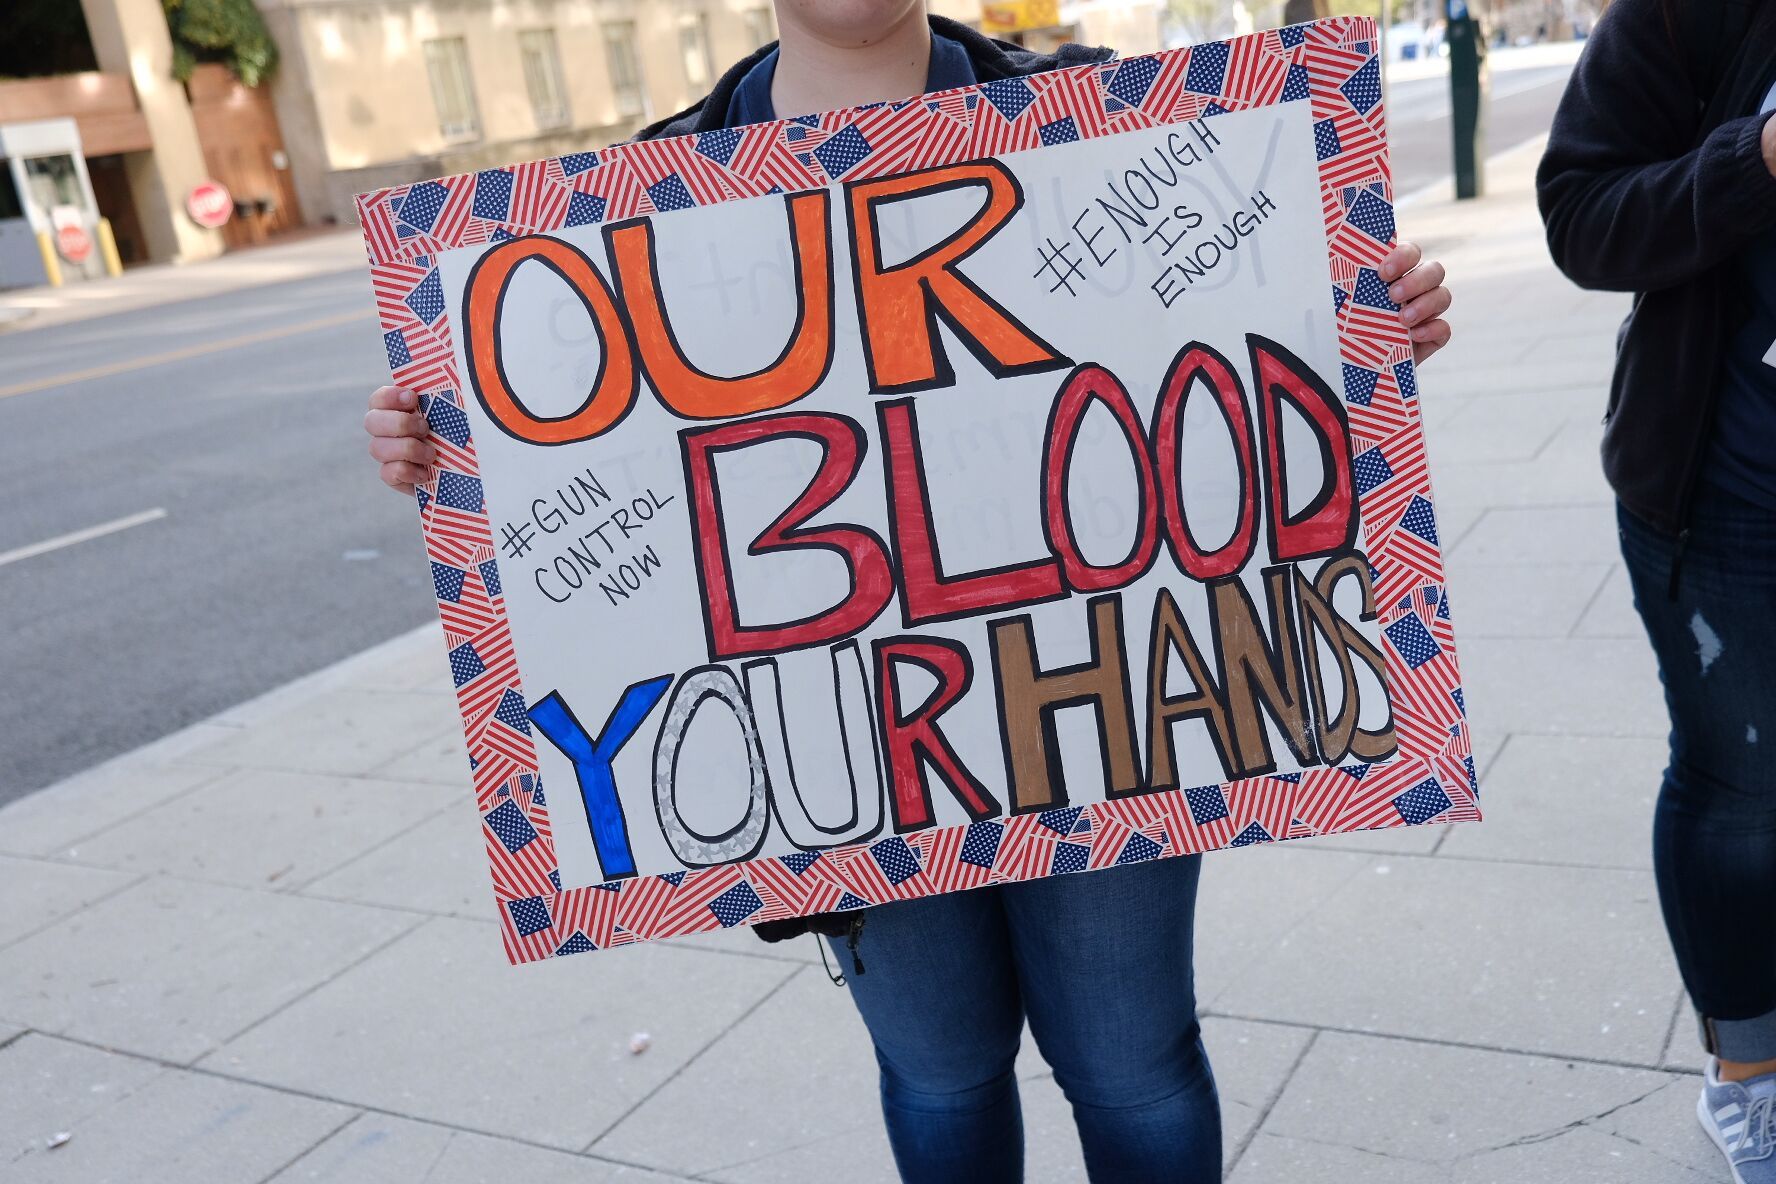 A protester's sign at the March for Our Lives rally in D.C. (Courtesy Shannon Finney Photography/<a href="https://www.shannonfinneyphotography.com/index" target="_blank" rel="noopener noreferrer">shannonfinneyphotography.com</a>)